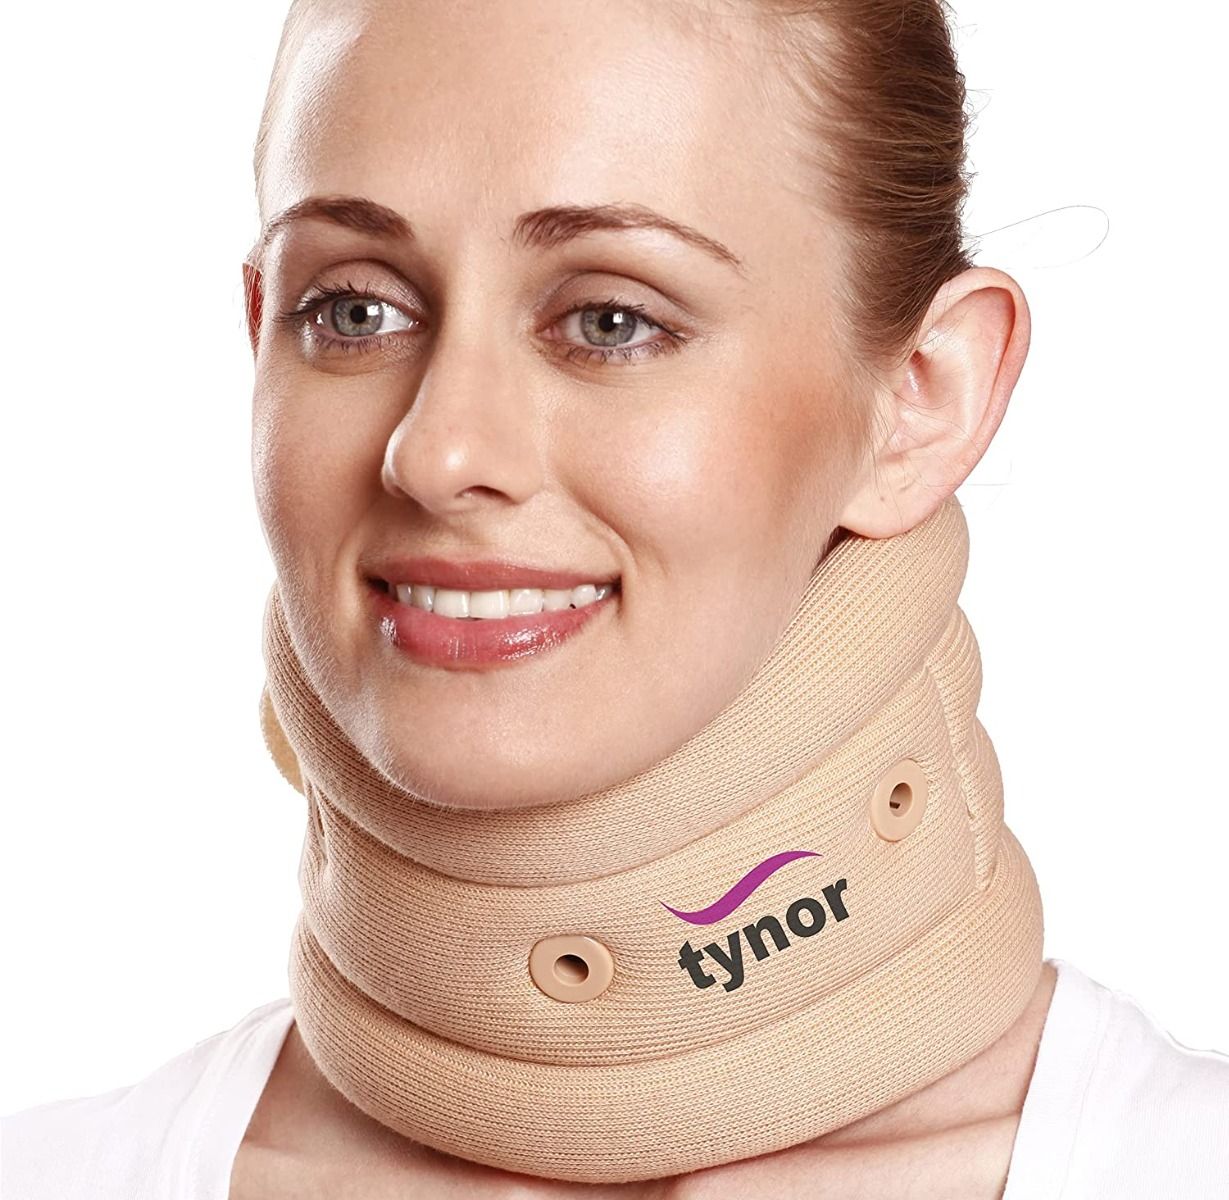 Buy Tynor Cervical Collar Soft Large, 1 Count Online